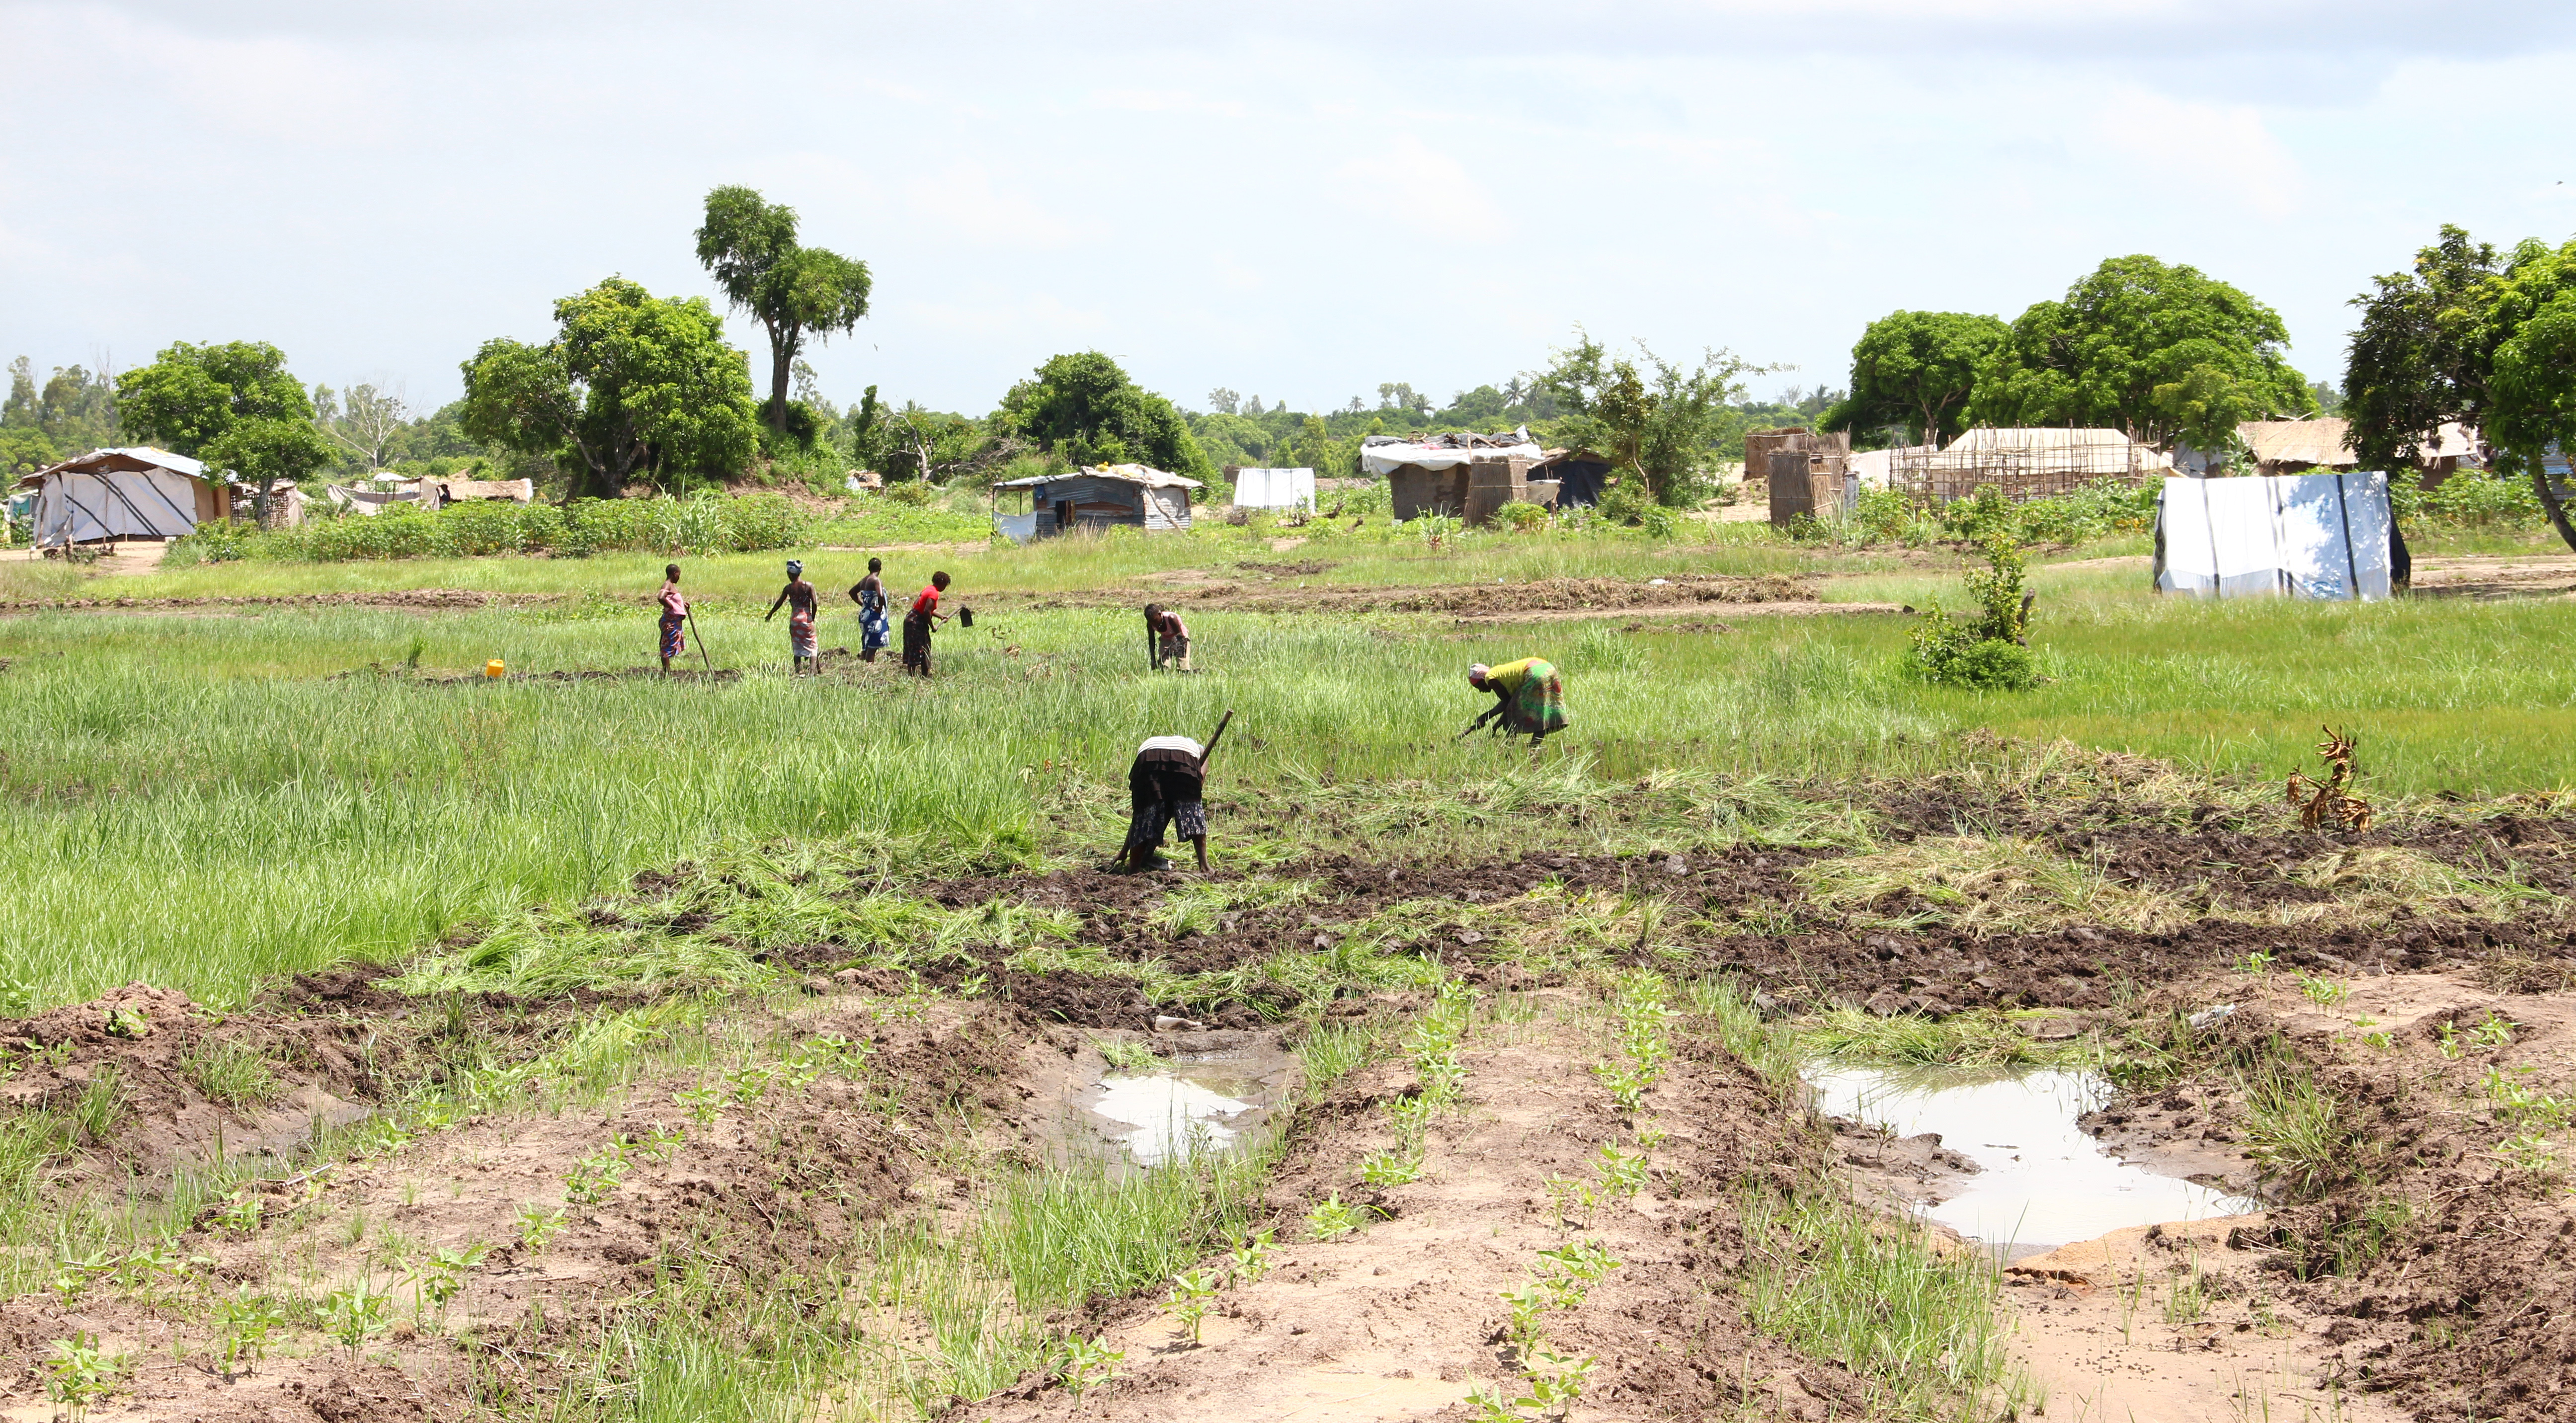 Mozambique – Mitigating climate change to prevent conflict